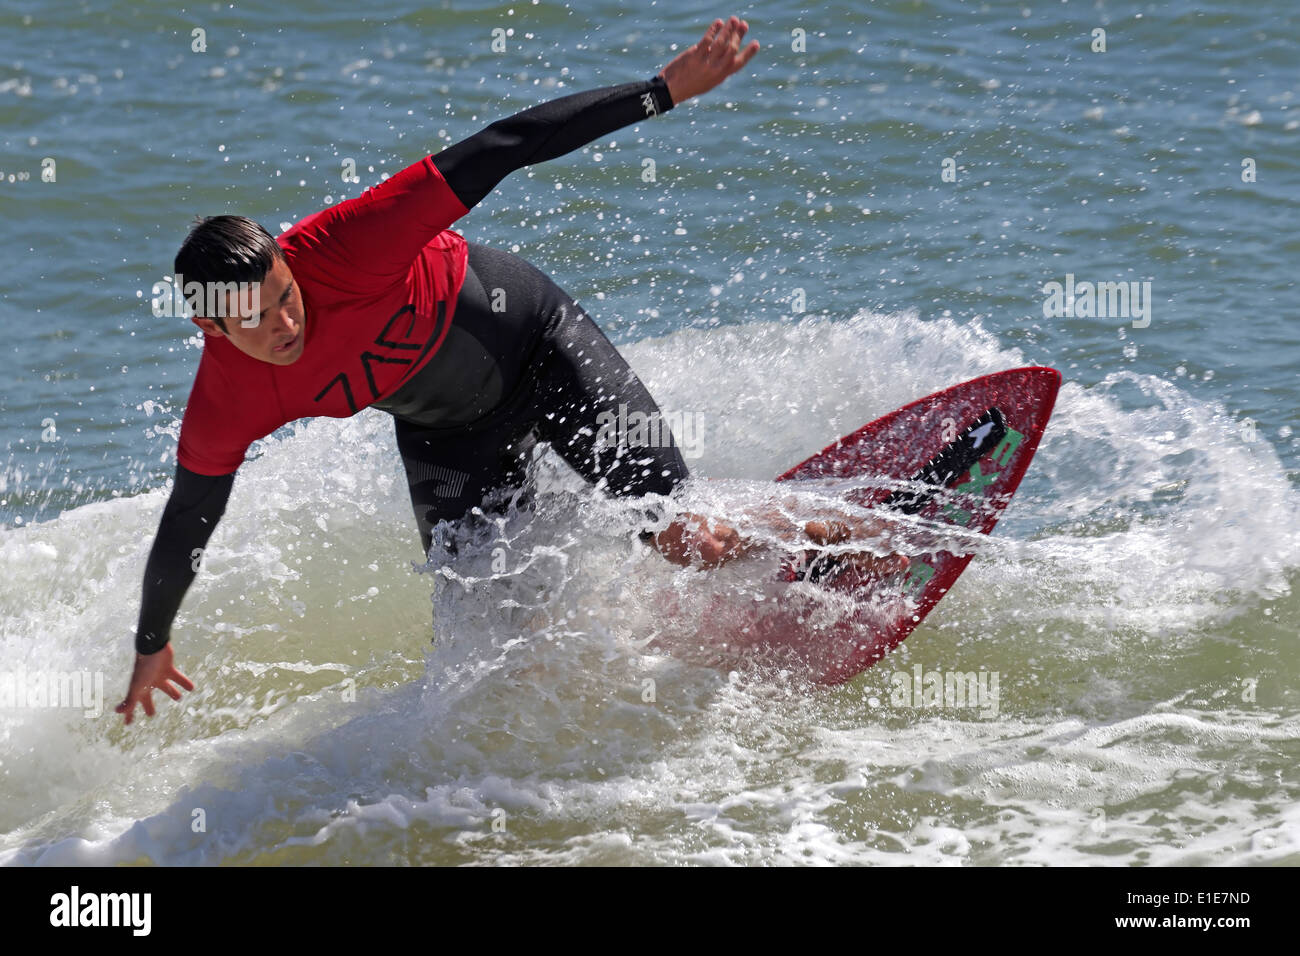 Skimboard Competitor Wearing Wetsuit Rides a Wave Stock Photo